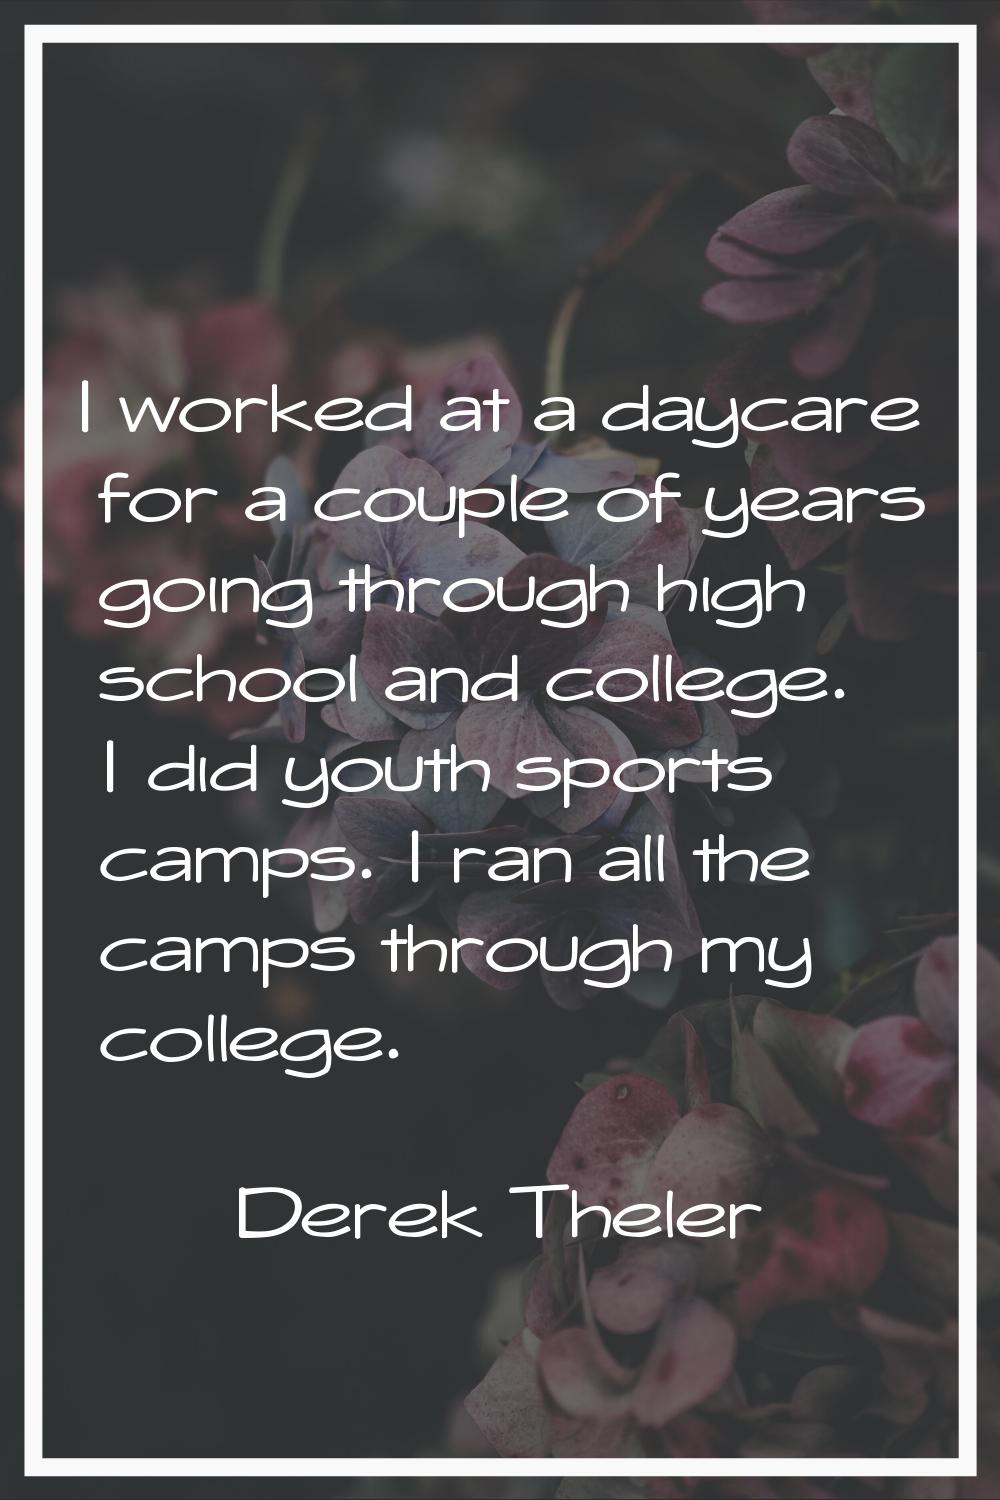 I worked at a daycare for a couple of years going through high school and college. I did youth spor